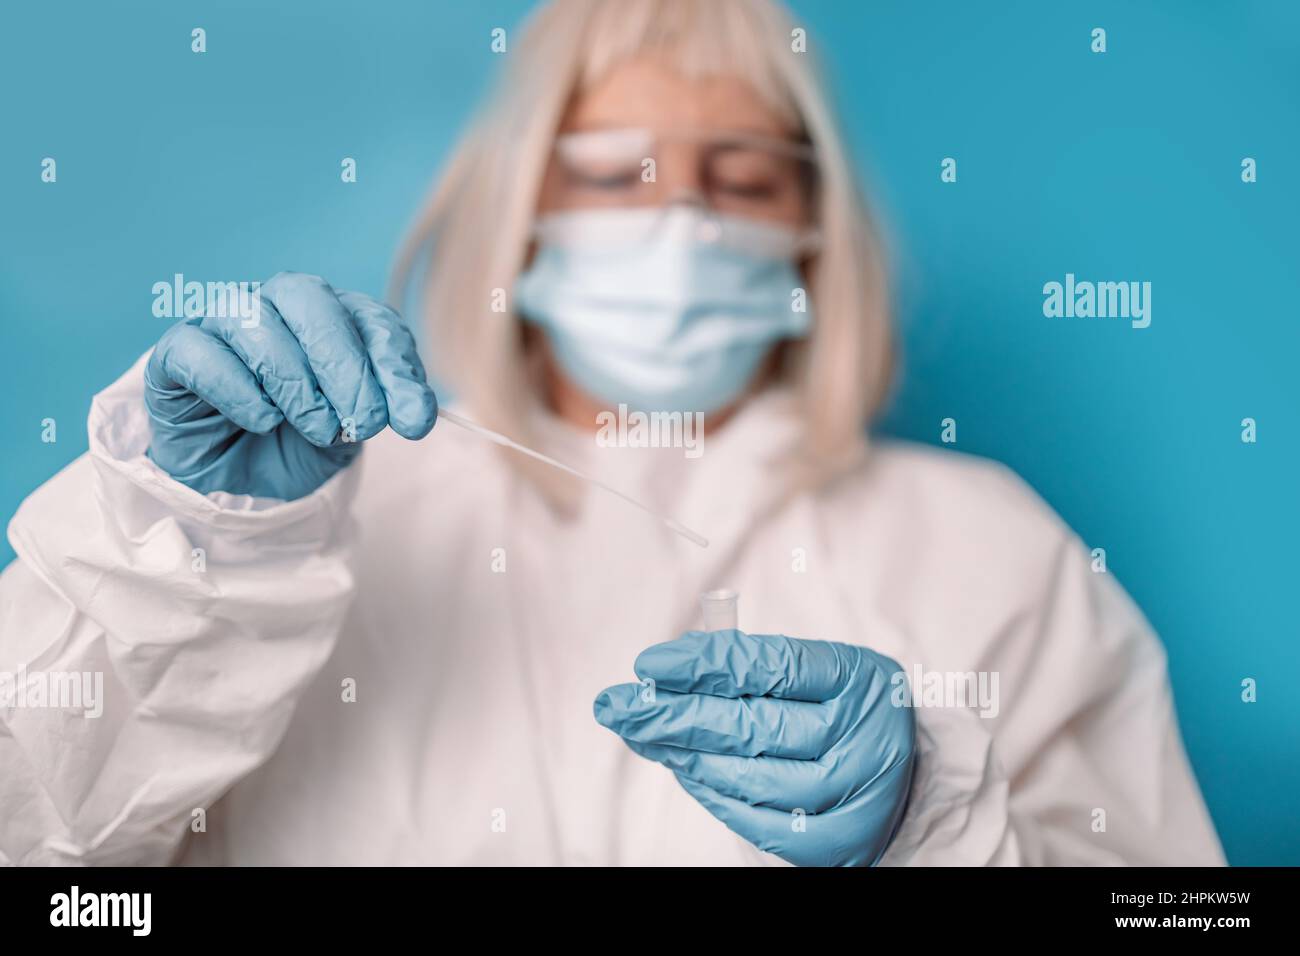 Covid 19 pcr test. Doctor in protective suit medical mask gloves using Swab saliva sample for diagnostic covid 19 coronavirus virus in lab. Stock Photo